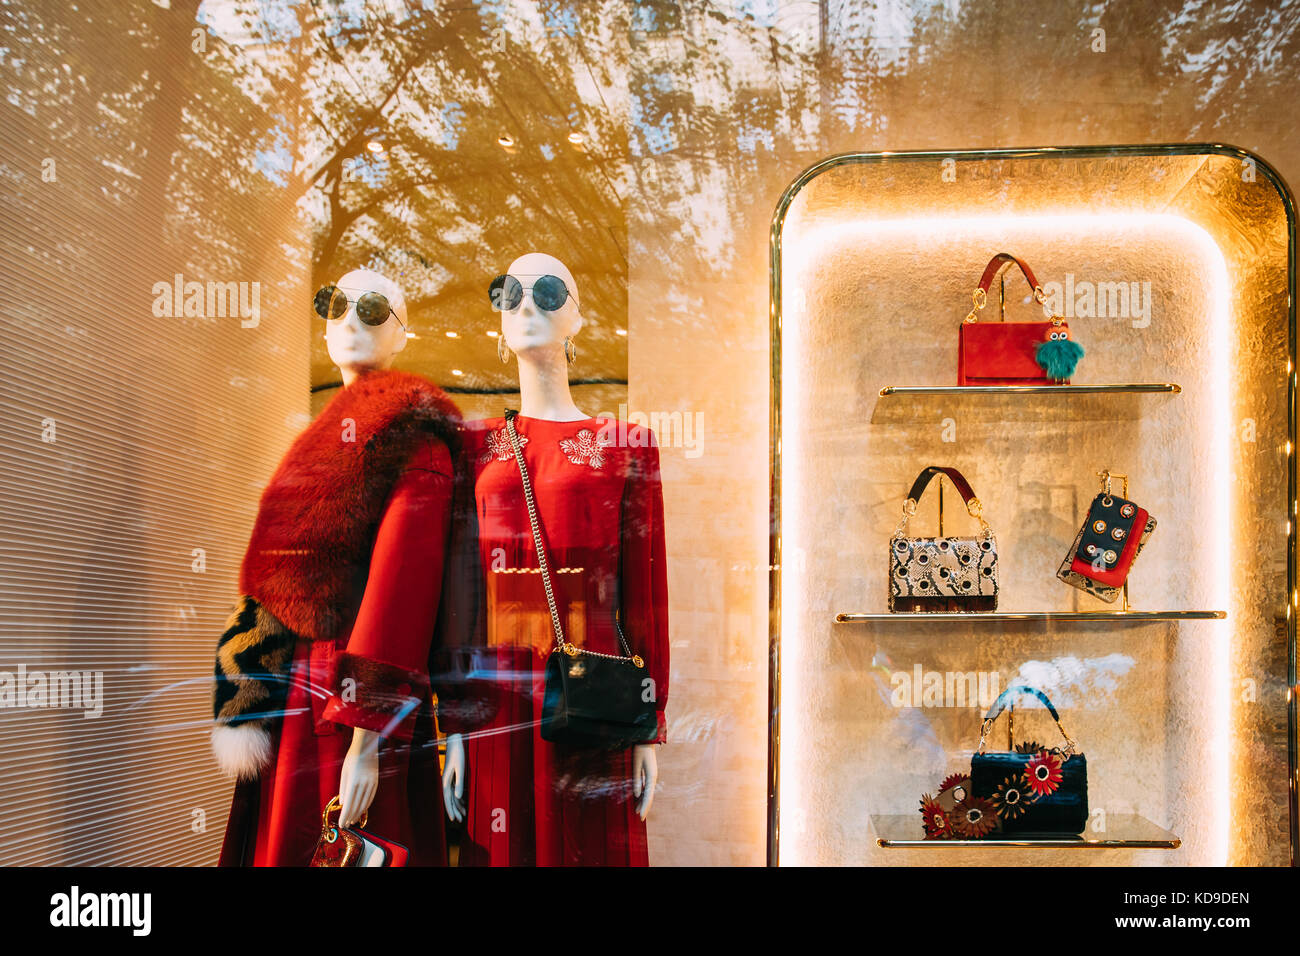 Female Mannequins Fashion Accessories In Shop Window Showcase Of Store Market Stock Photo -